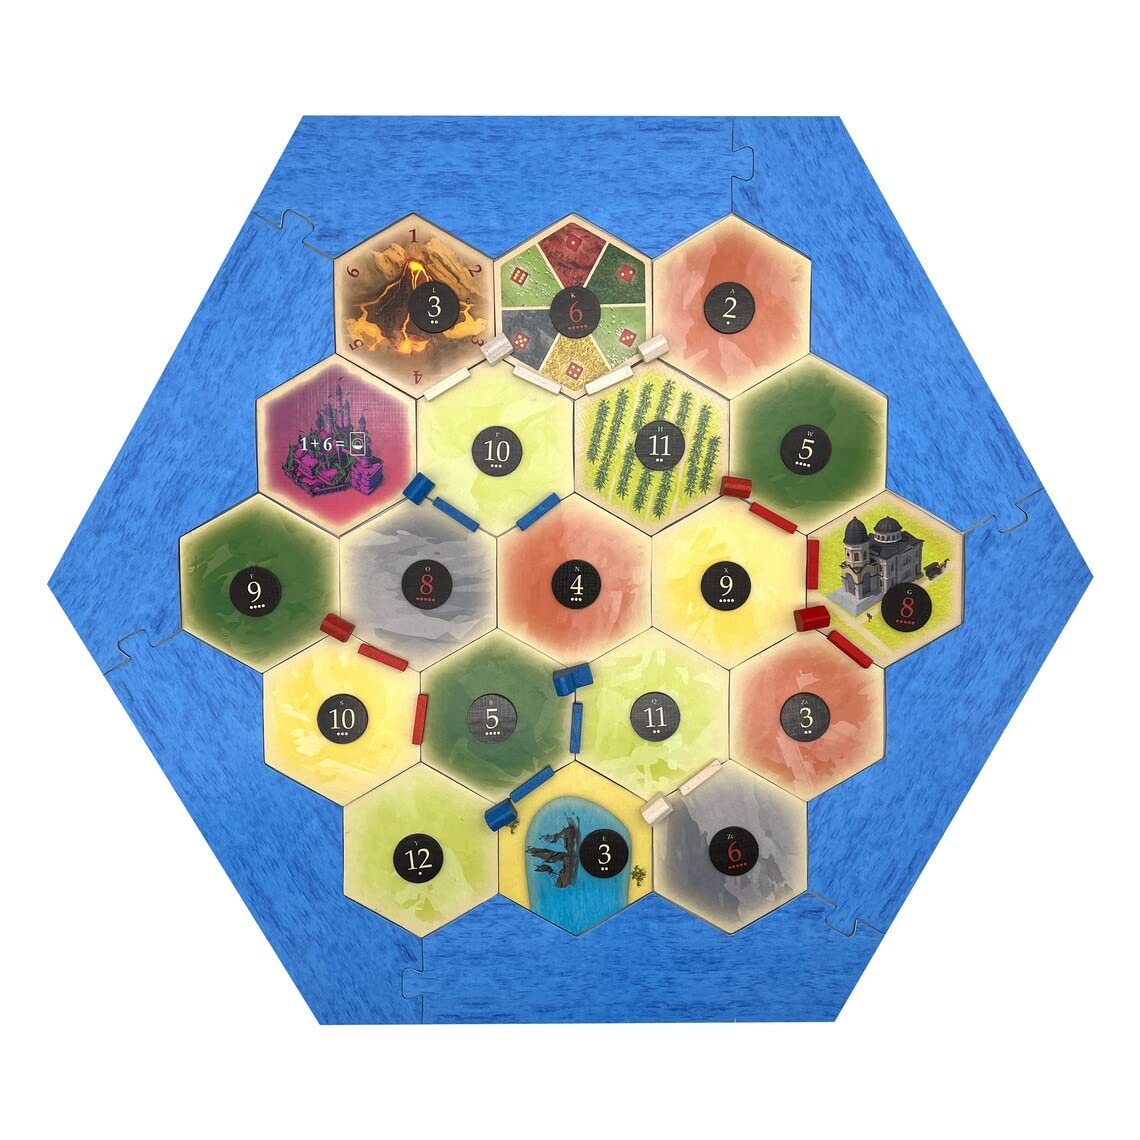 Amalgam Multi-Resource Replacement Hex Scenario compatible with Catan's Settlers of Catan, Seafarers, Cities and Knights and Catan Expansions